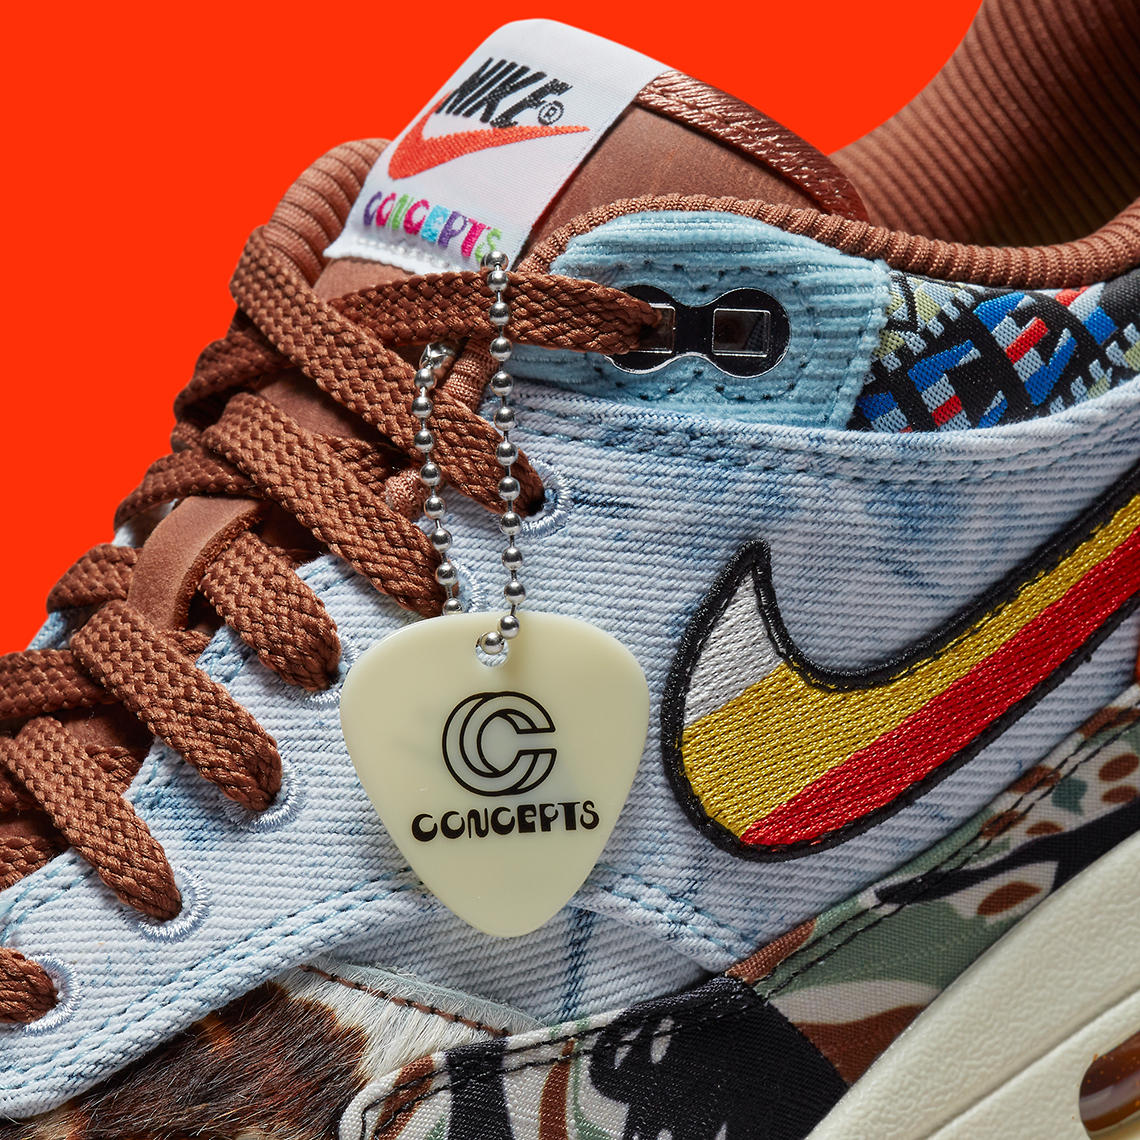 Concepts x Nike Air Max 1 SP Collab Pack Leaked